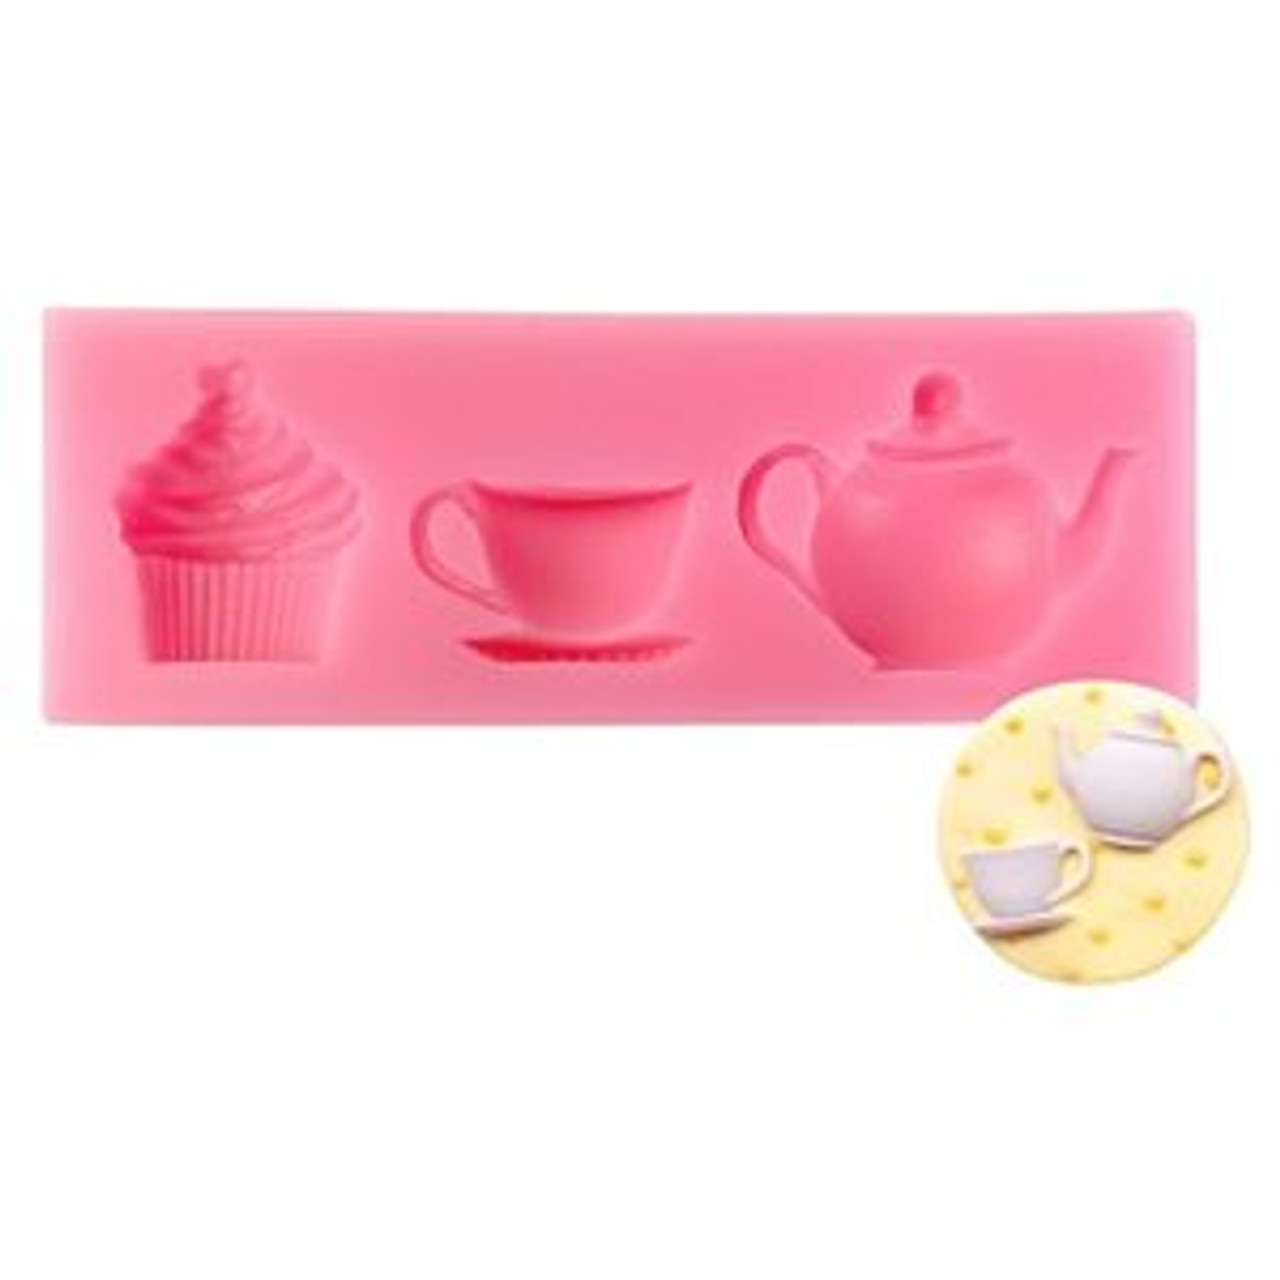 Coffee Mug Mold. Small Tea Cup Mold. Hot Chocolate Cup Craft Silicone Mold  for Soap, Epoxy, Etc -  Canada